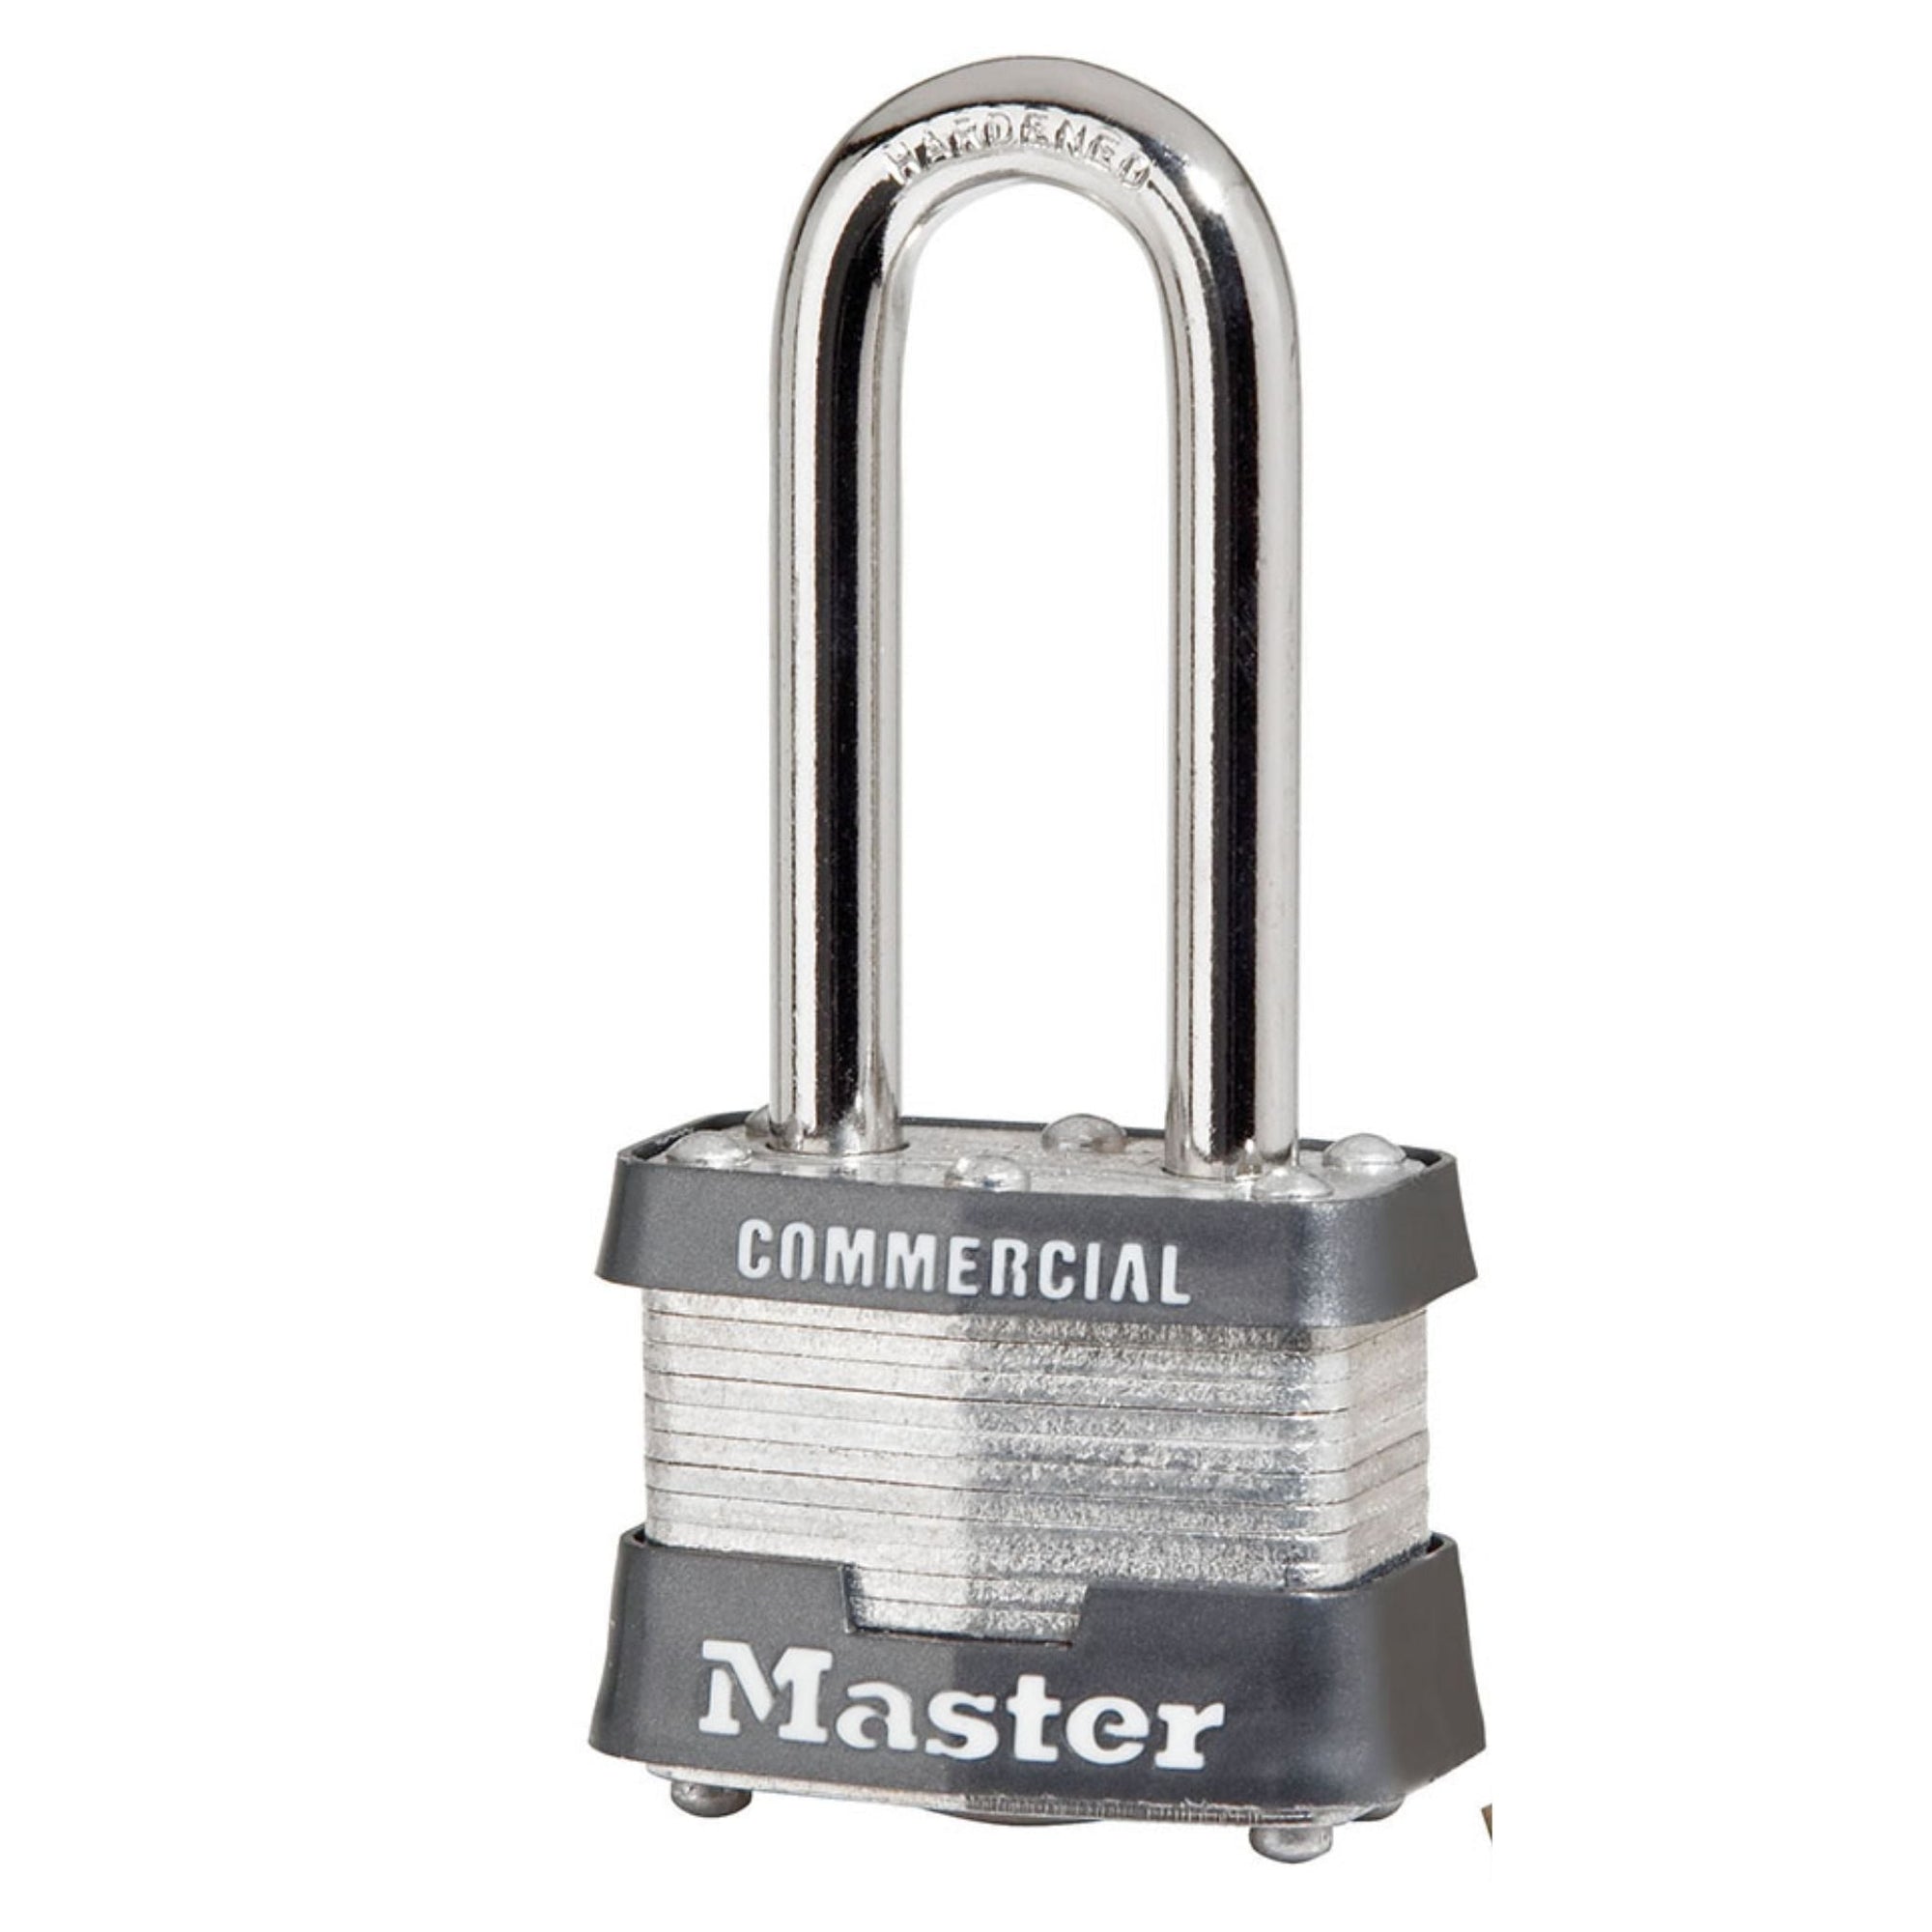 Master Lock 3KALH-A1463 Padlock Set-of-3 Locks Keyed Alike to Match KAA1463 with 2-Inch Shackle - The Lock Source